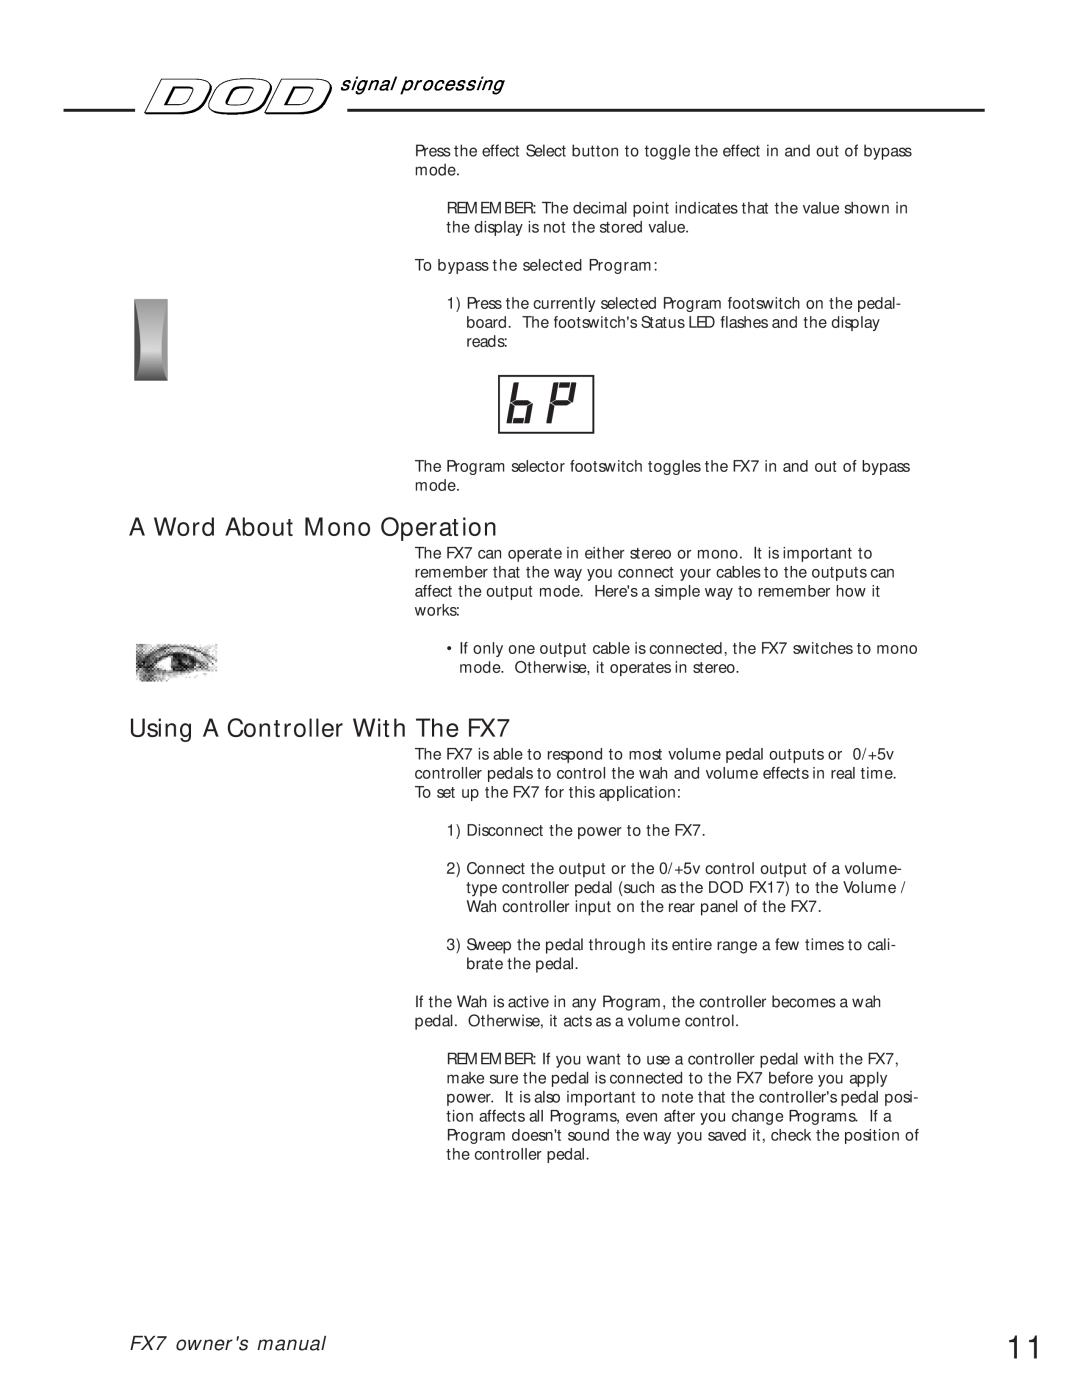 DOD owner manual A Word About Mono Operation, Using A Controller With The FX7, signal processing 